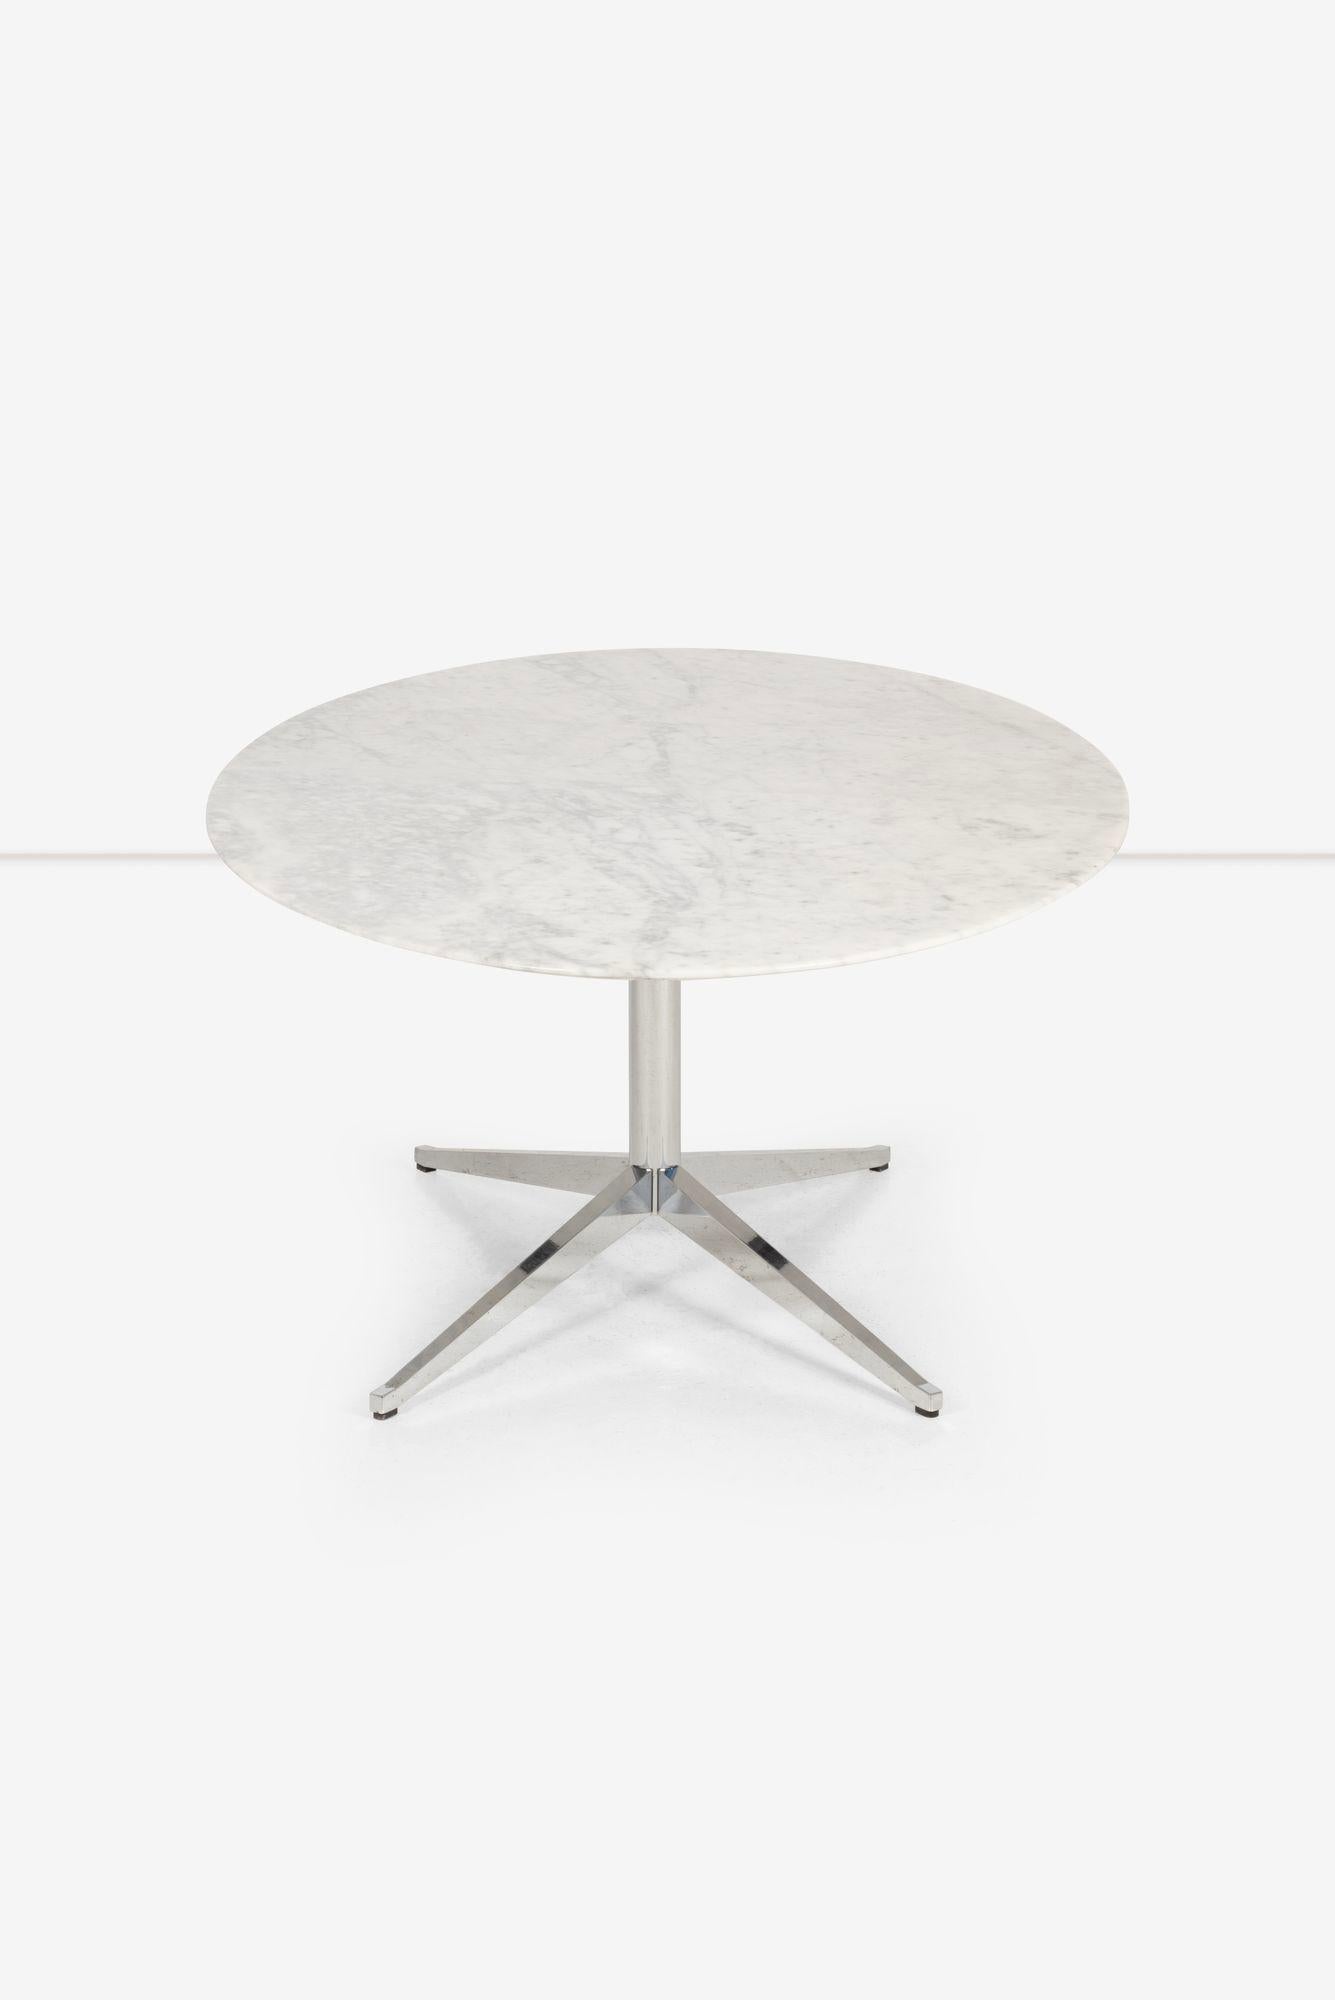 Florence Knoll Oval Dining Table with 3/4